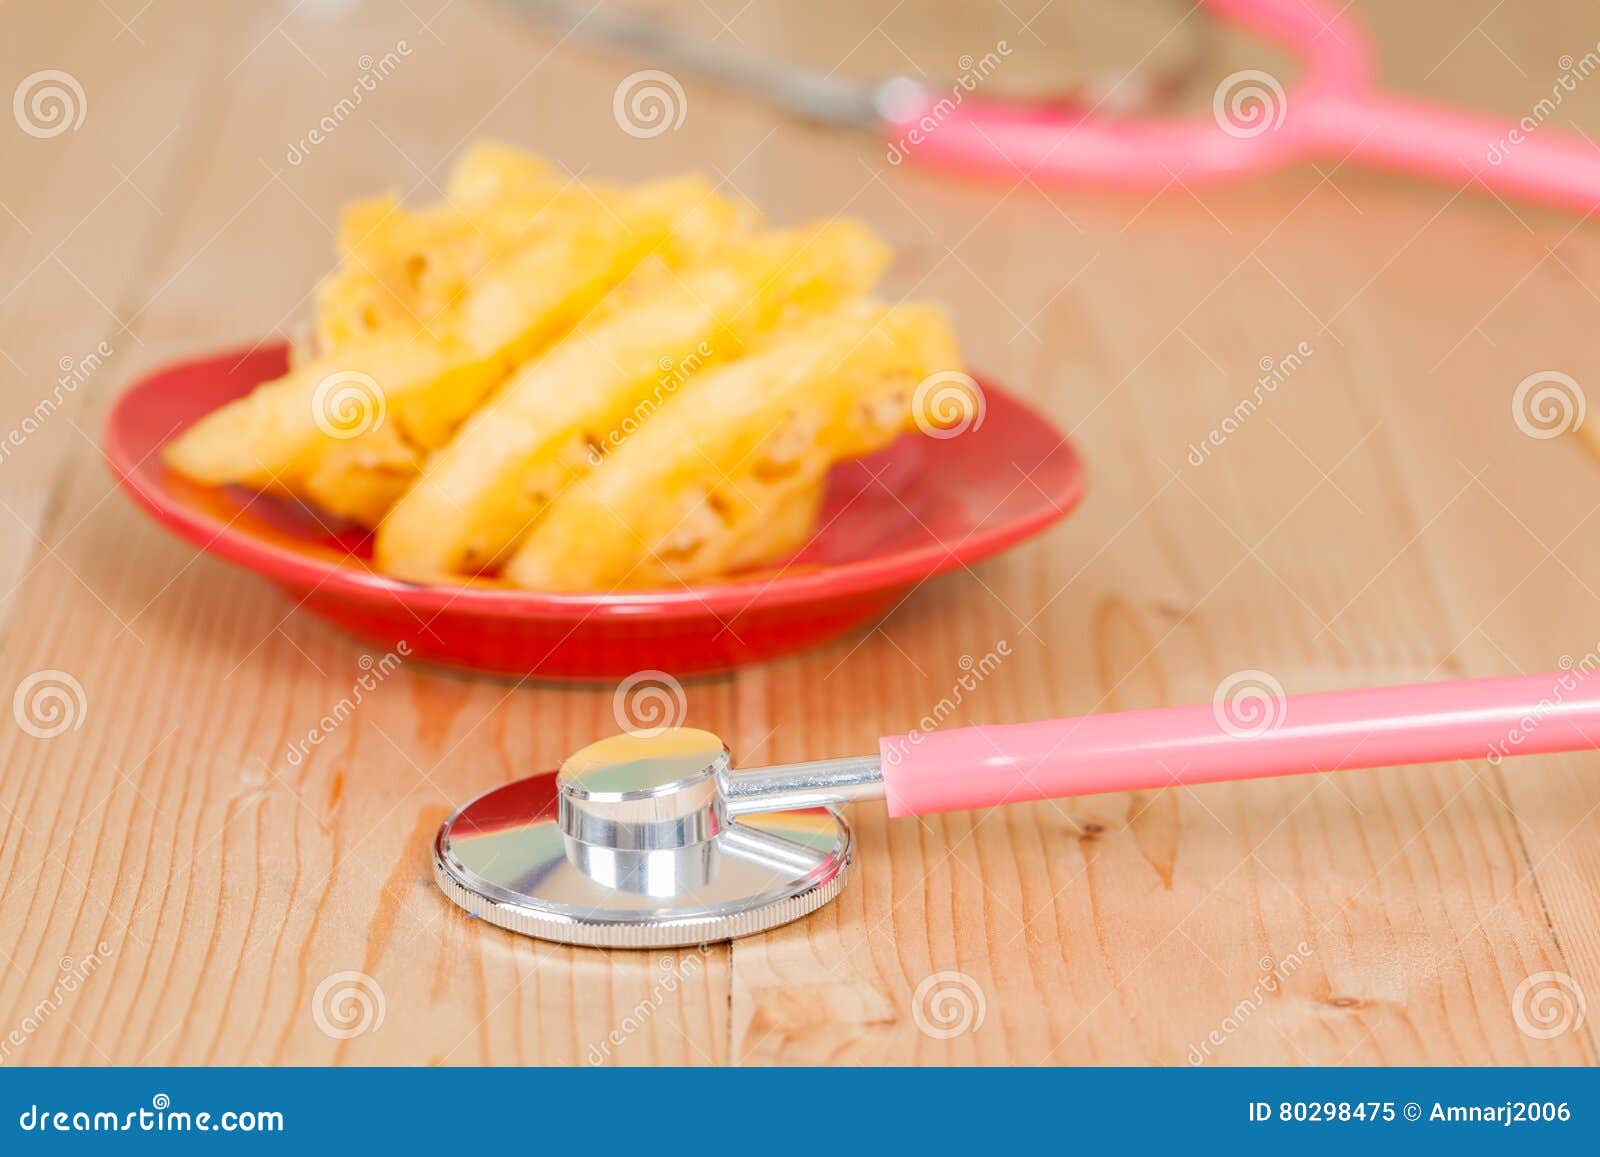 Stethoscope With Pineapple In Plate Stock Image Image Of Sweet